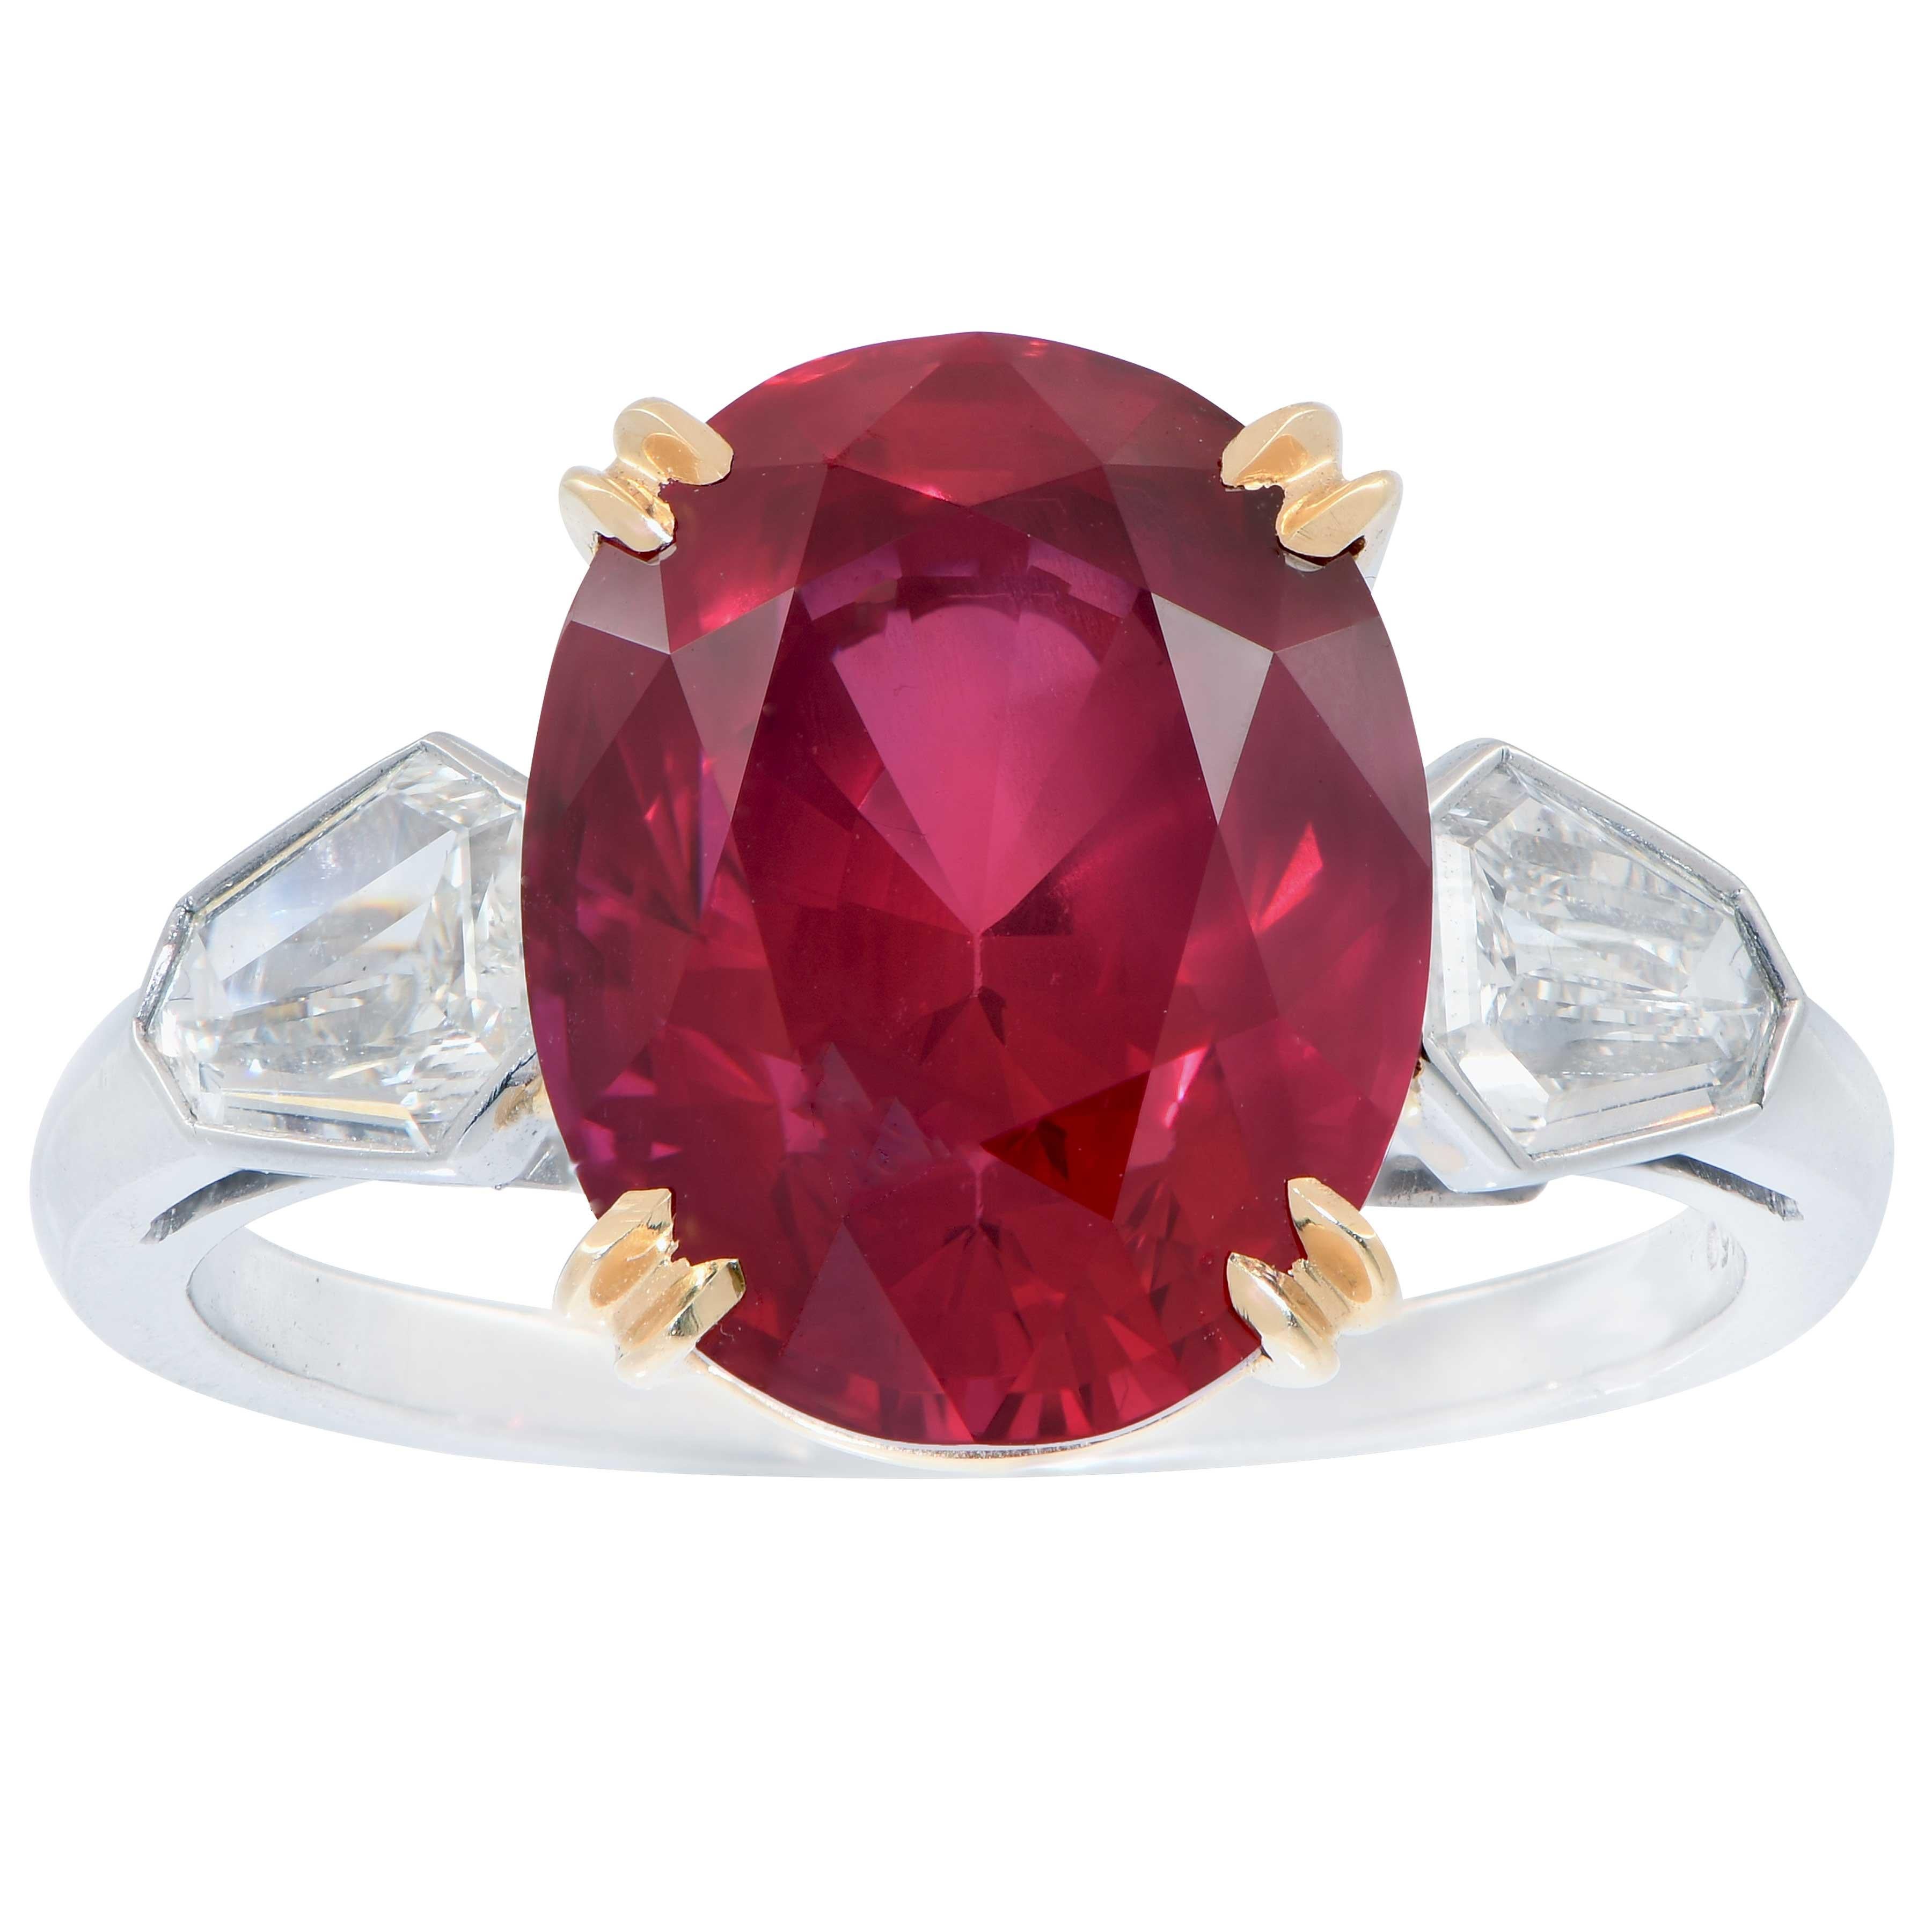 7.47 Carat GRS Graded No Heat Mozambique Oval Cut Ruby and Diamond Ring Features an exquisite pigeon's blood vivid red ruby with excellent crystal and proportions. This gorgeous ruby is set in a platinum mounting with two kite facet cut diamonds in